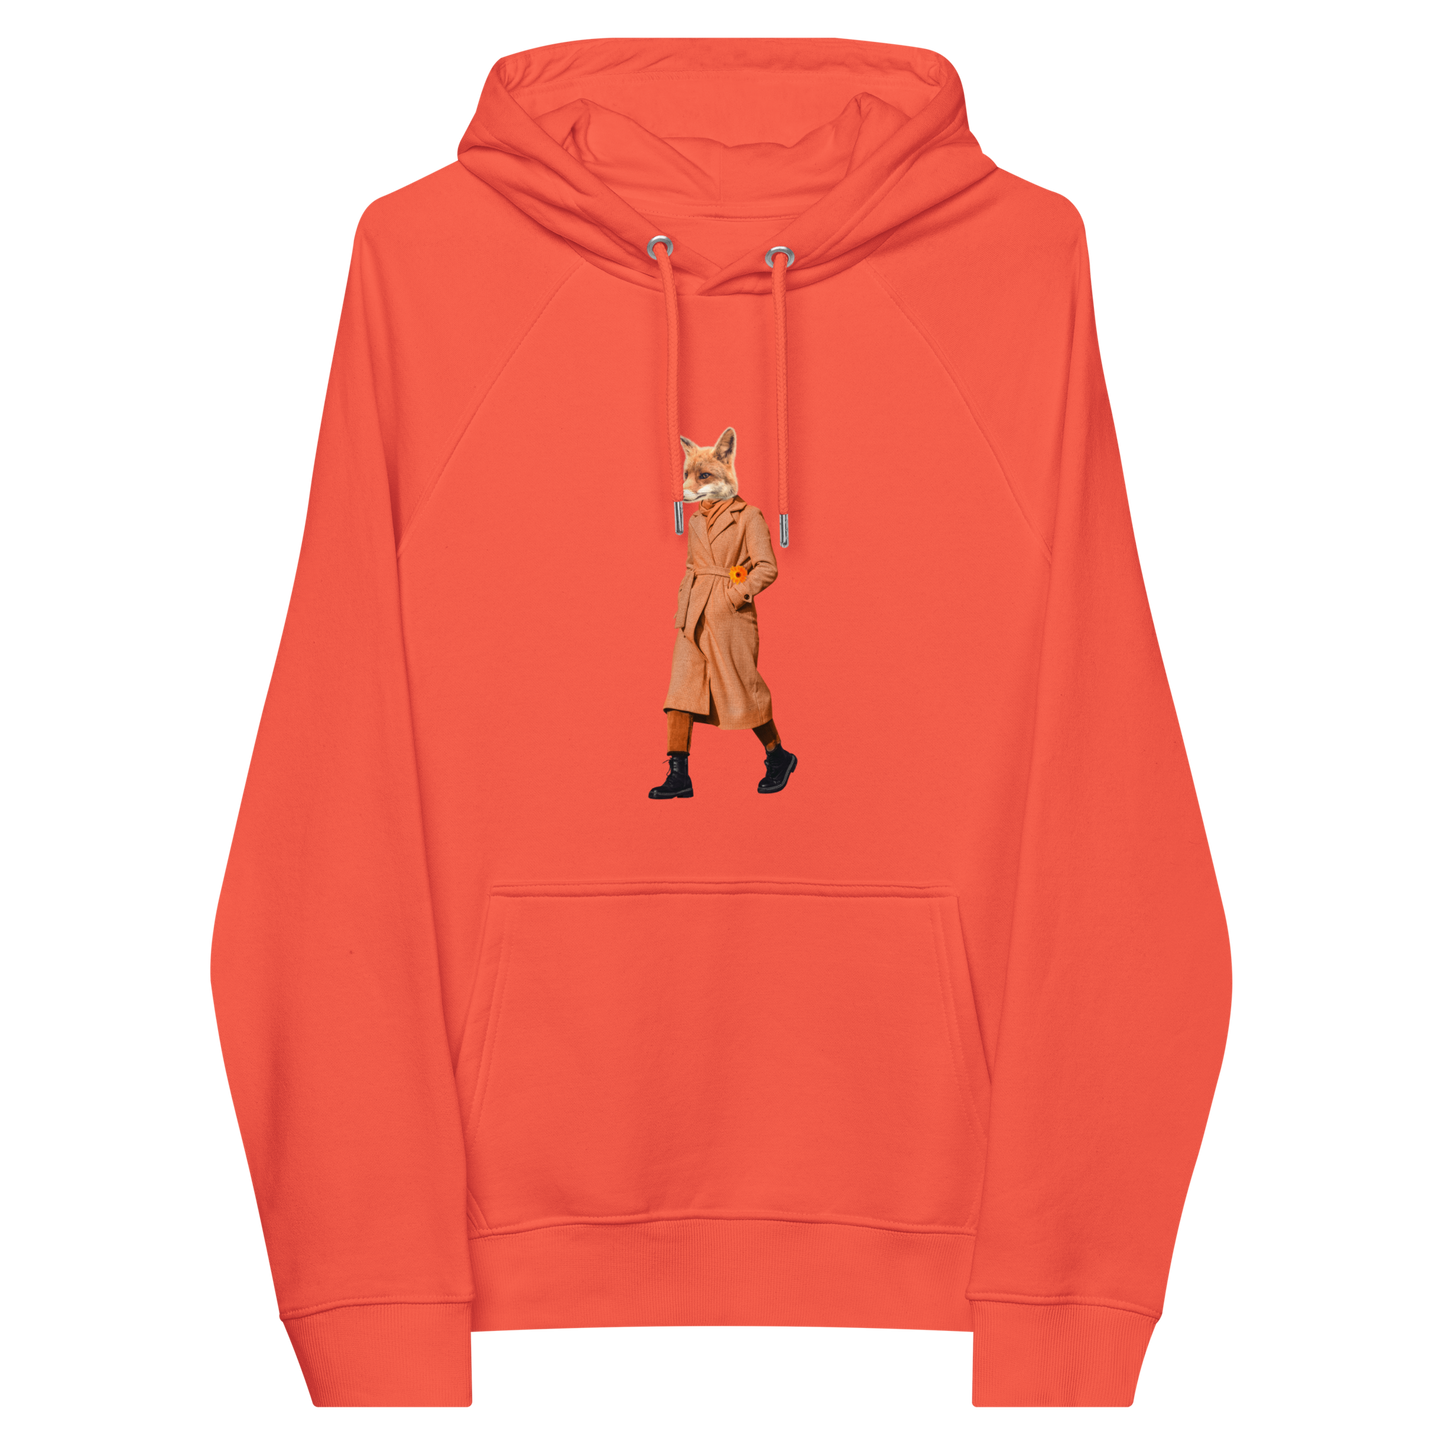 Burnt Orange Anthropomorphic Fox Raglan Hoodie featuring a sly Anthropomorphic Fox in a Trench Coat graphic on the chest - Funny Graphic Fox Hoodies - Boozy Fox